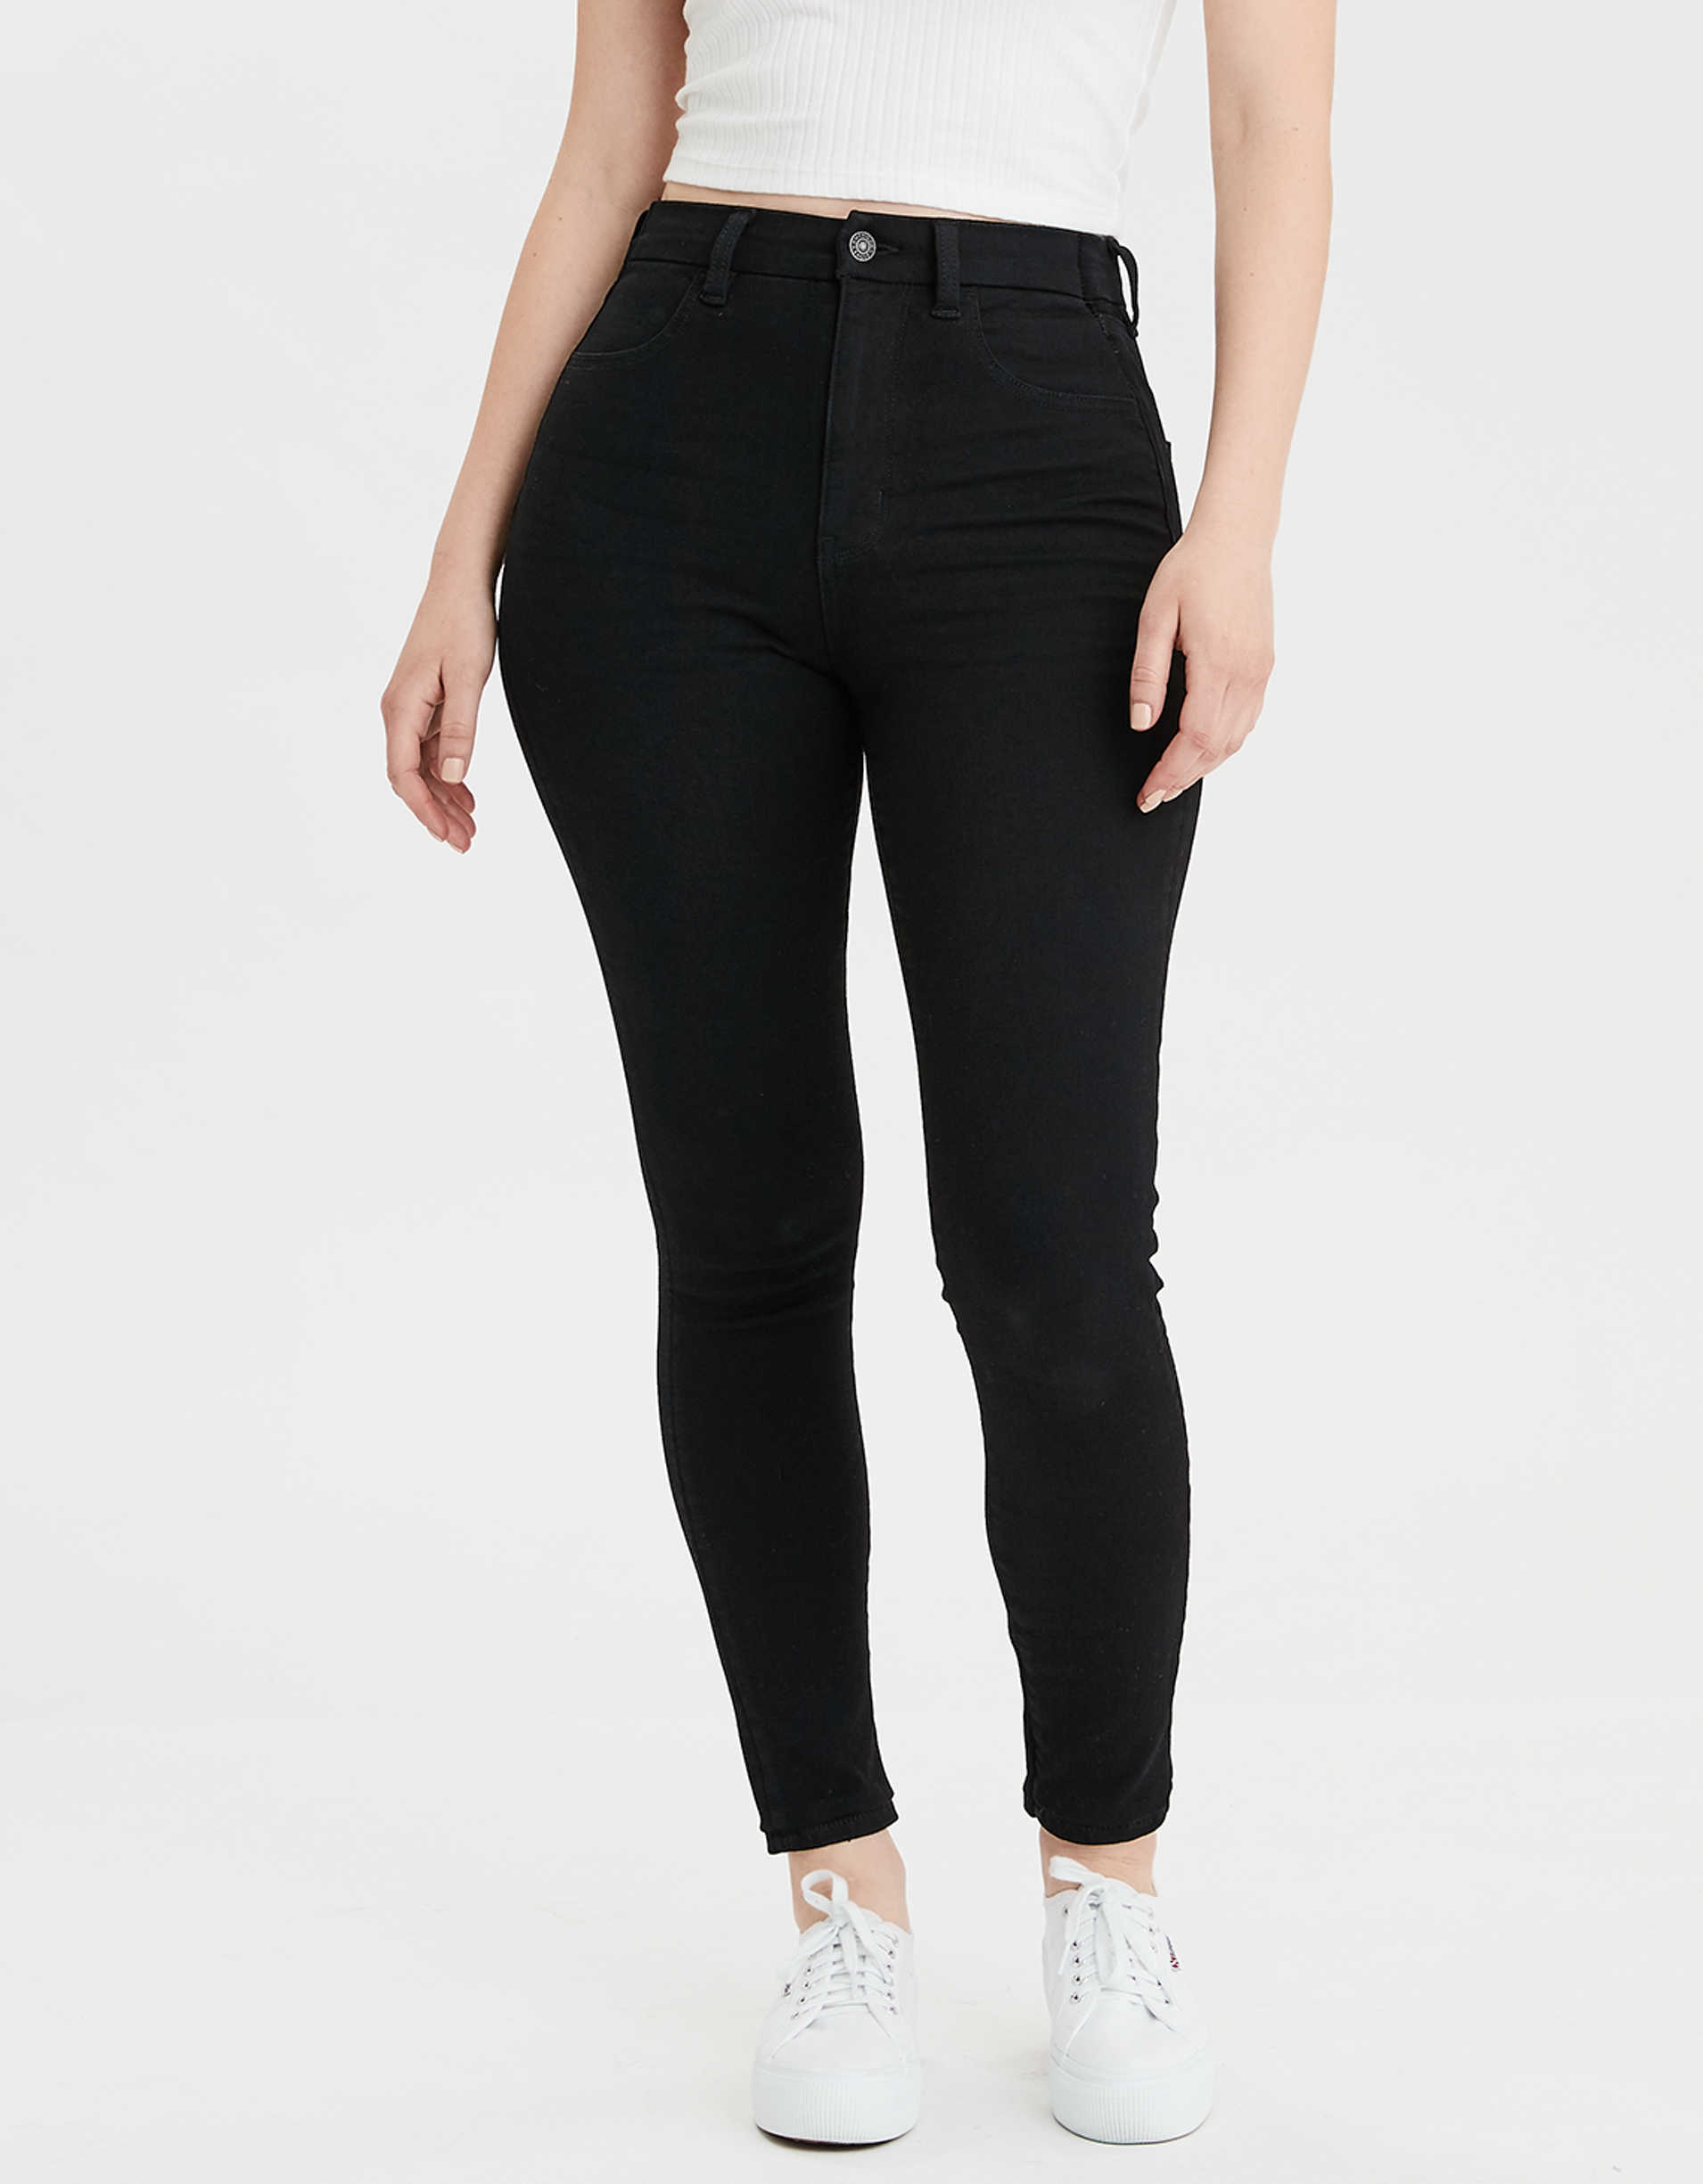 AE The Dream Jean Curvy Super High-Waisted Jegging